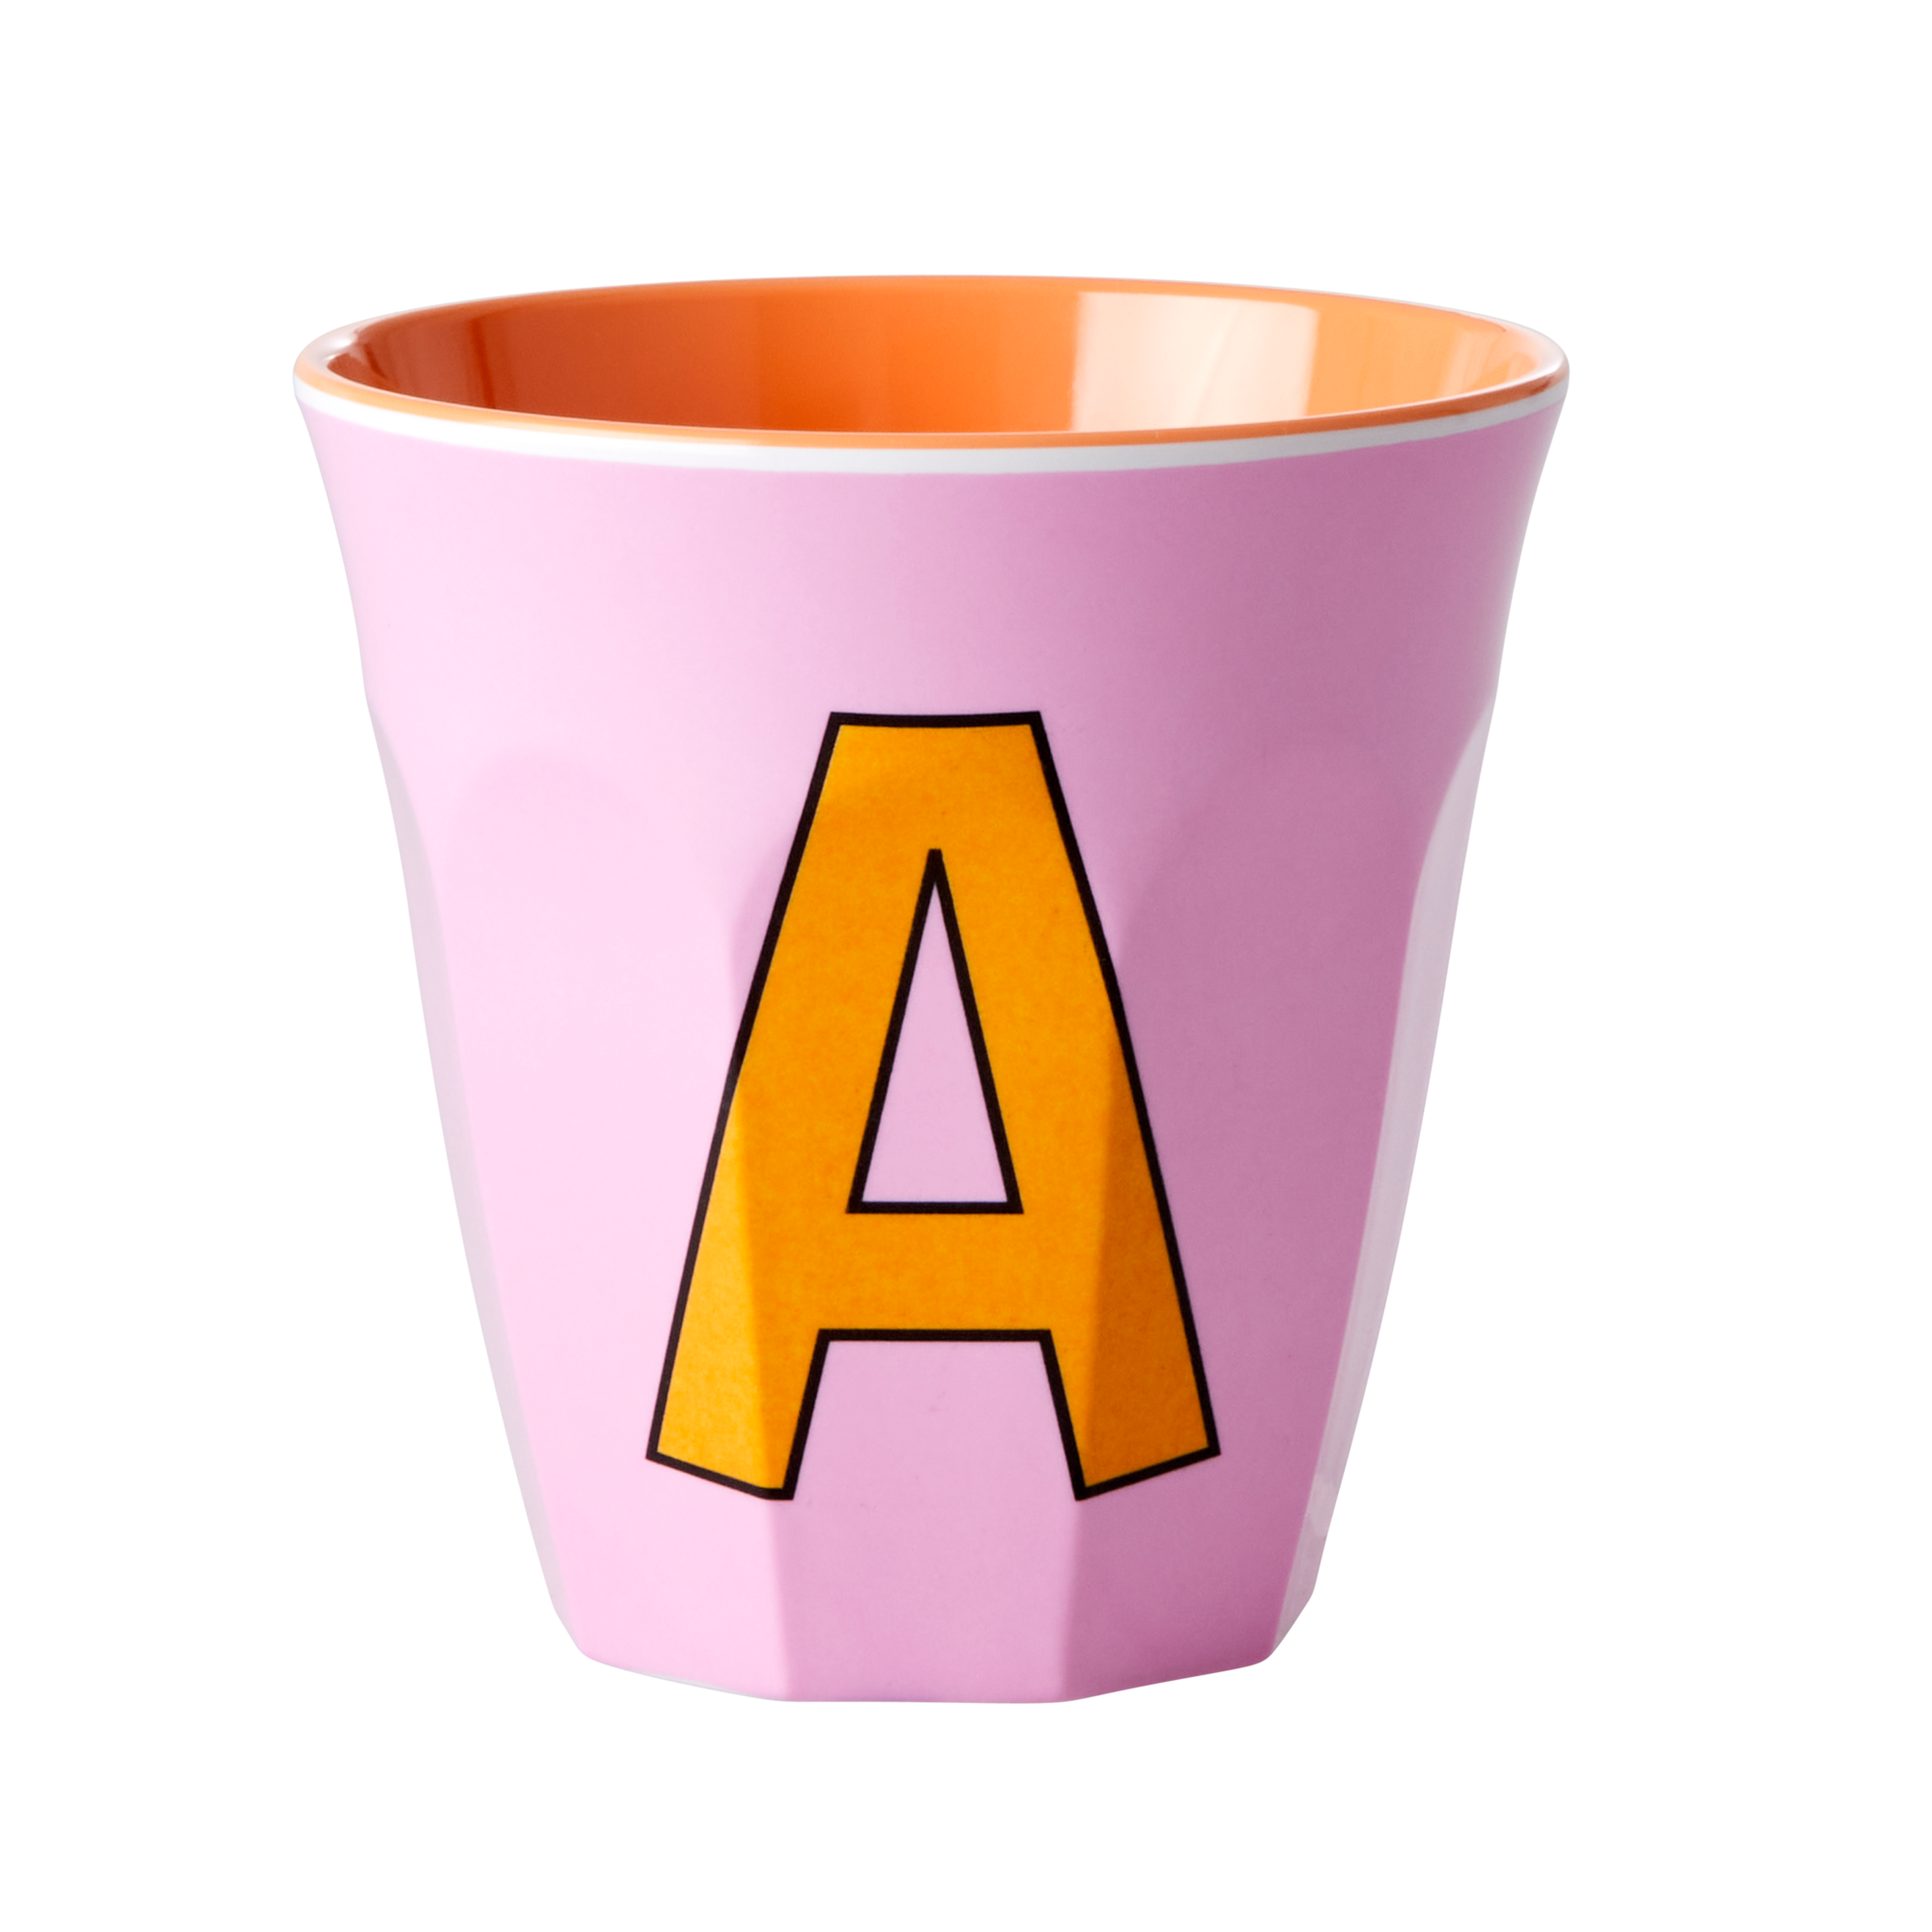 Melamine cup by Rice by Rice in the colors pink, and orange with the letter "A"